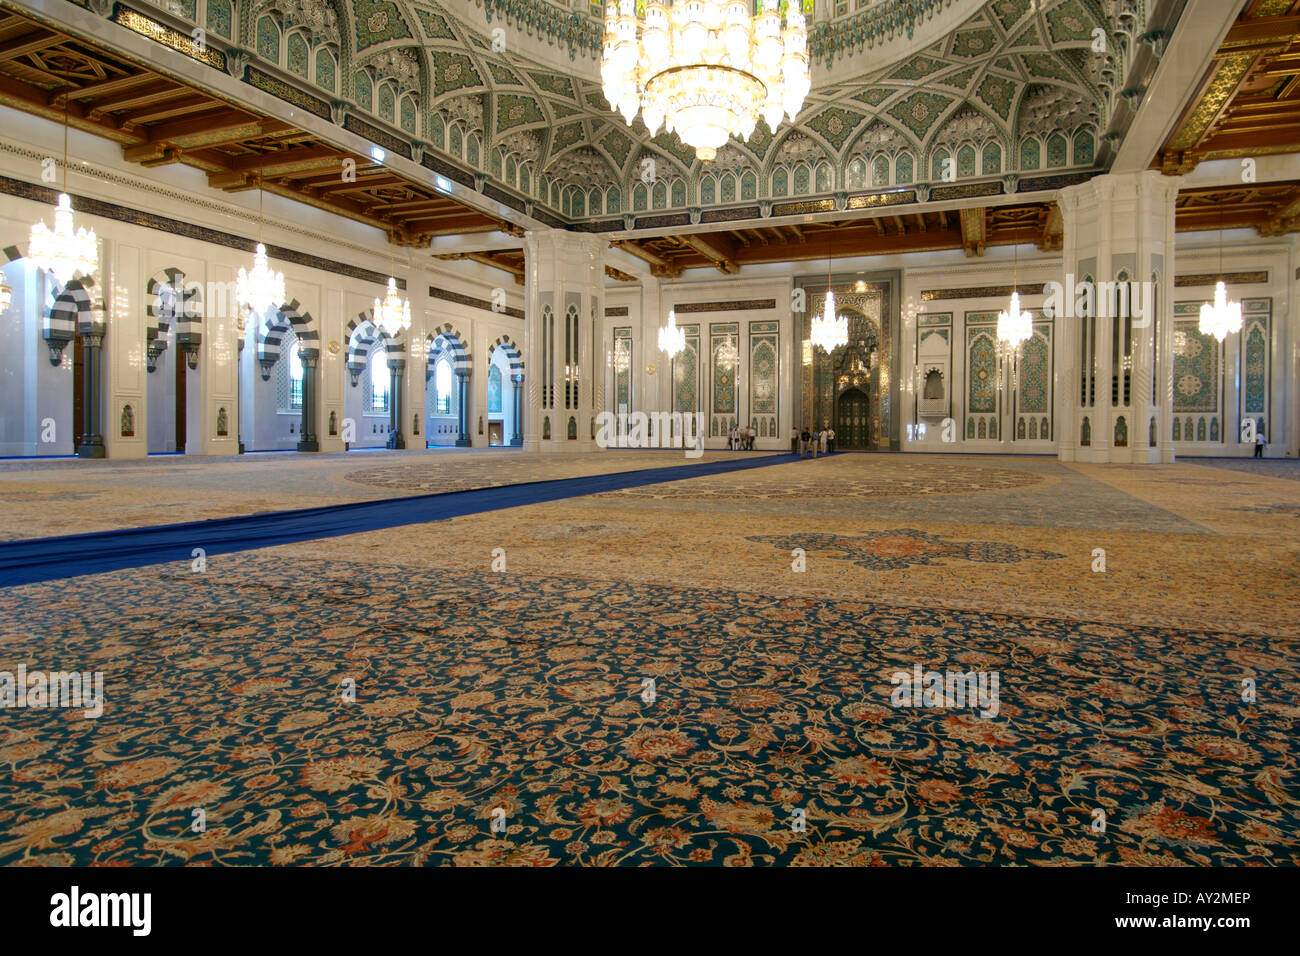 Interior of the prayer area of the Sultan Qaboos Grand Mosque in Muscat, the capital of Oman. Stock Photo